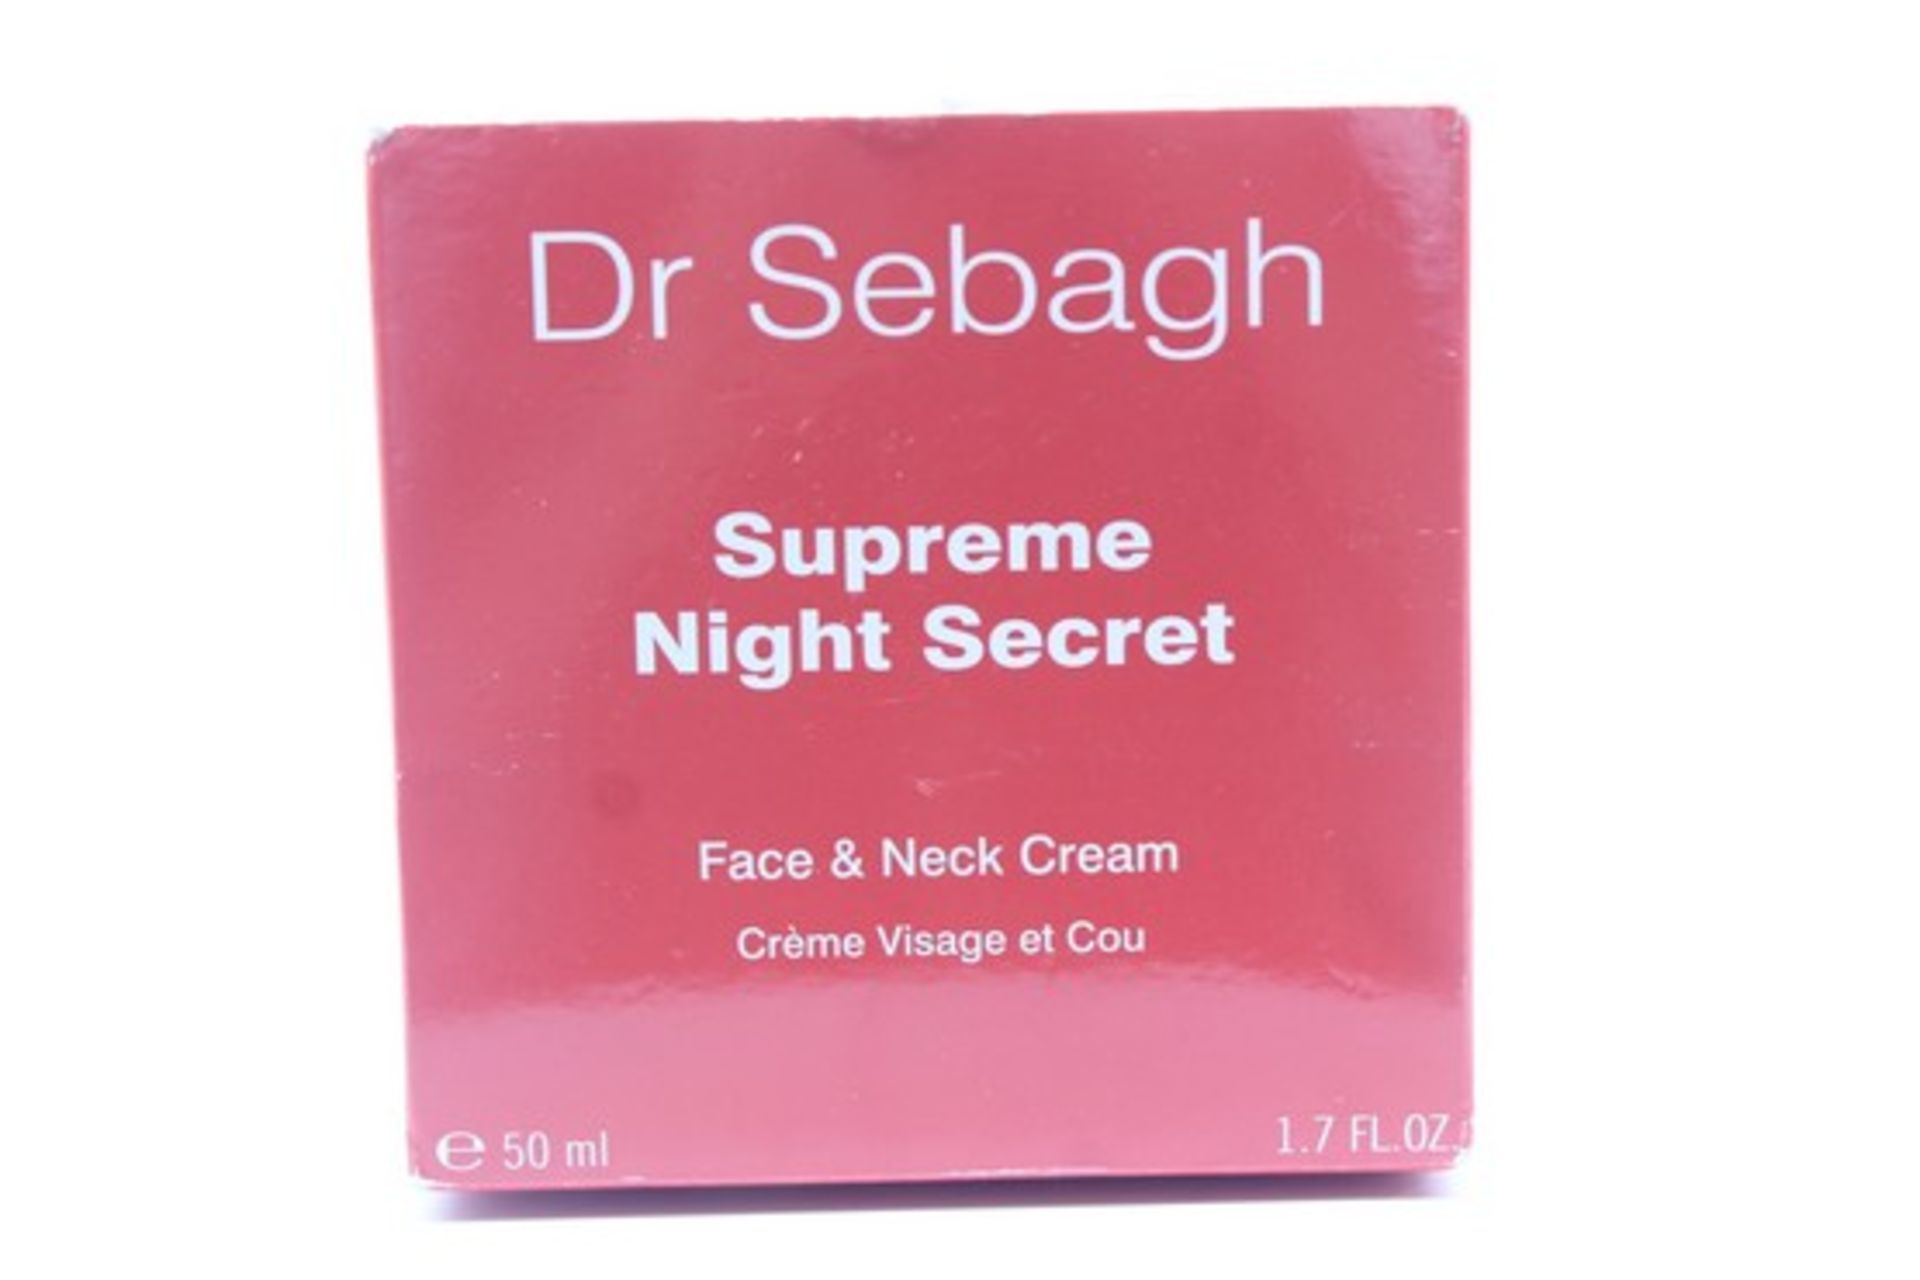 BOXED BRAND NEW DR SEBAGH SUPREME NIGHT SECRET FACE AND NECK CREAM RRP £185 (DS-TLH-A)(26.034)(